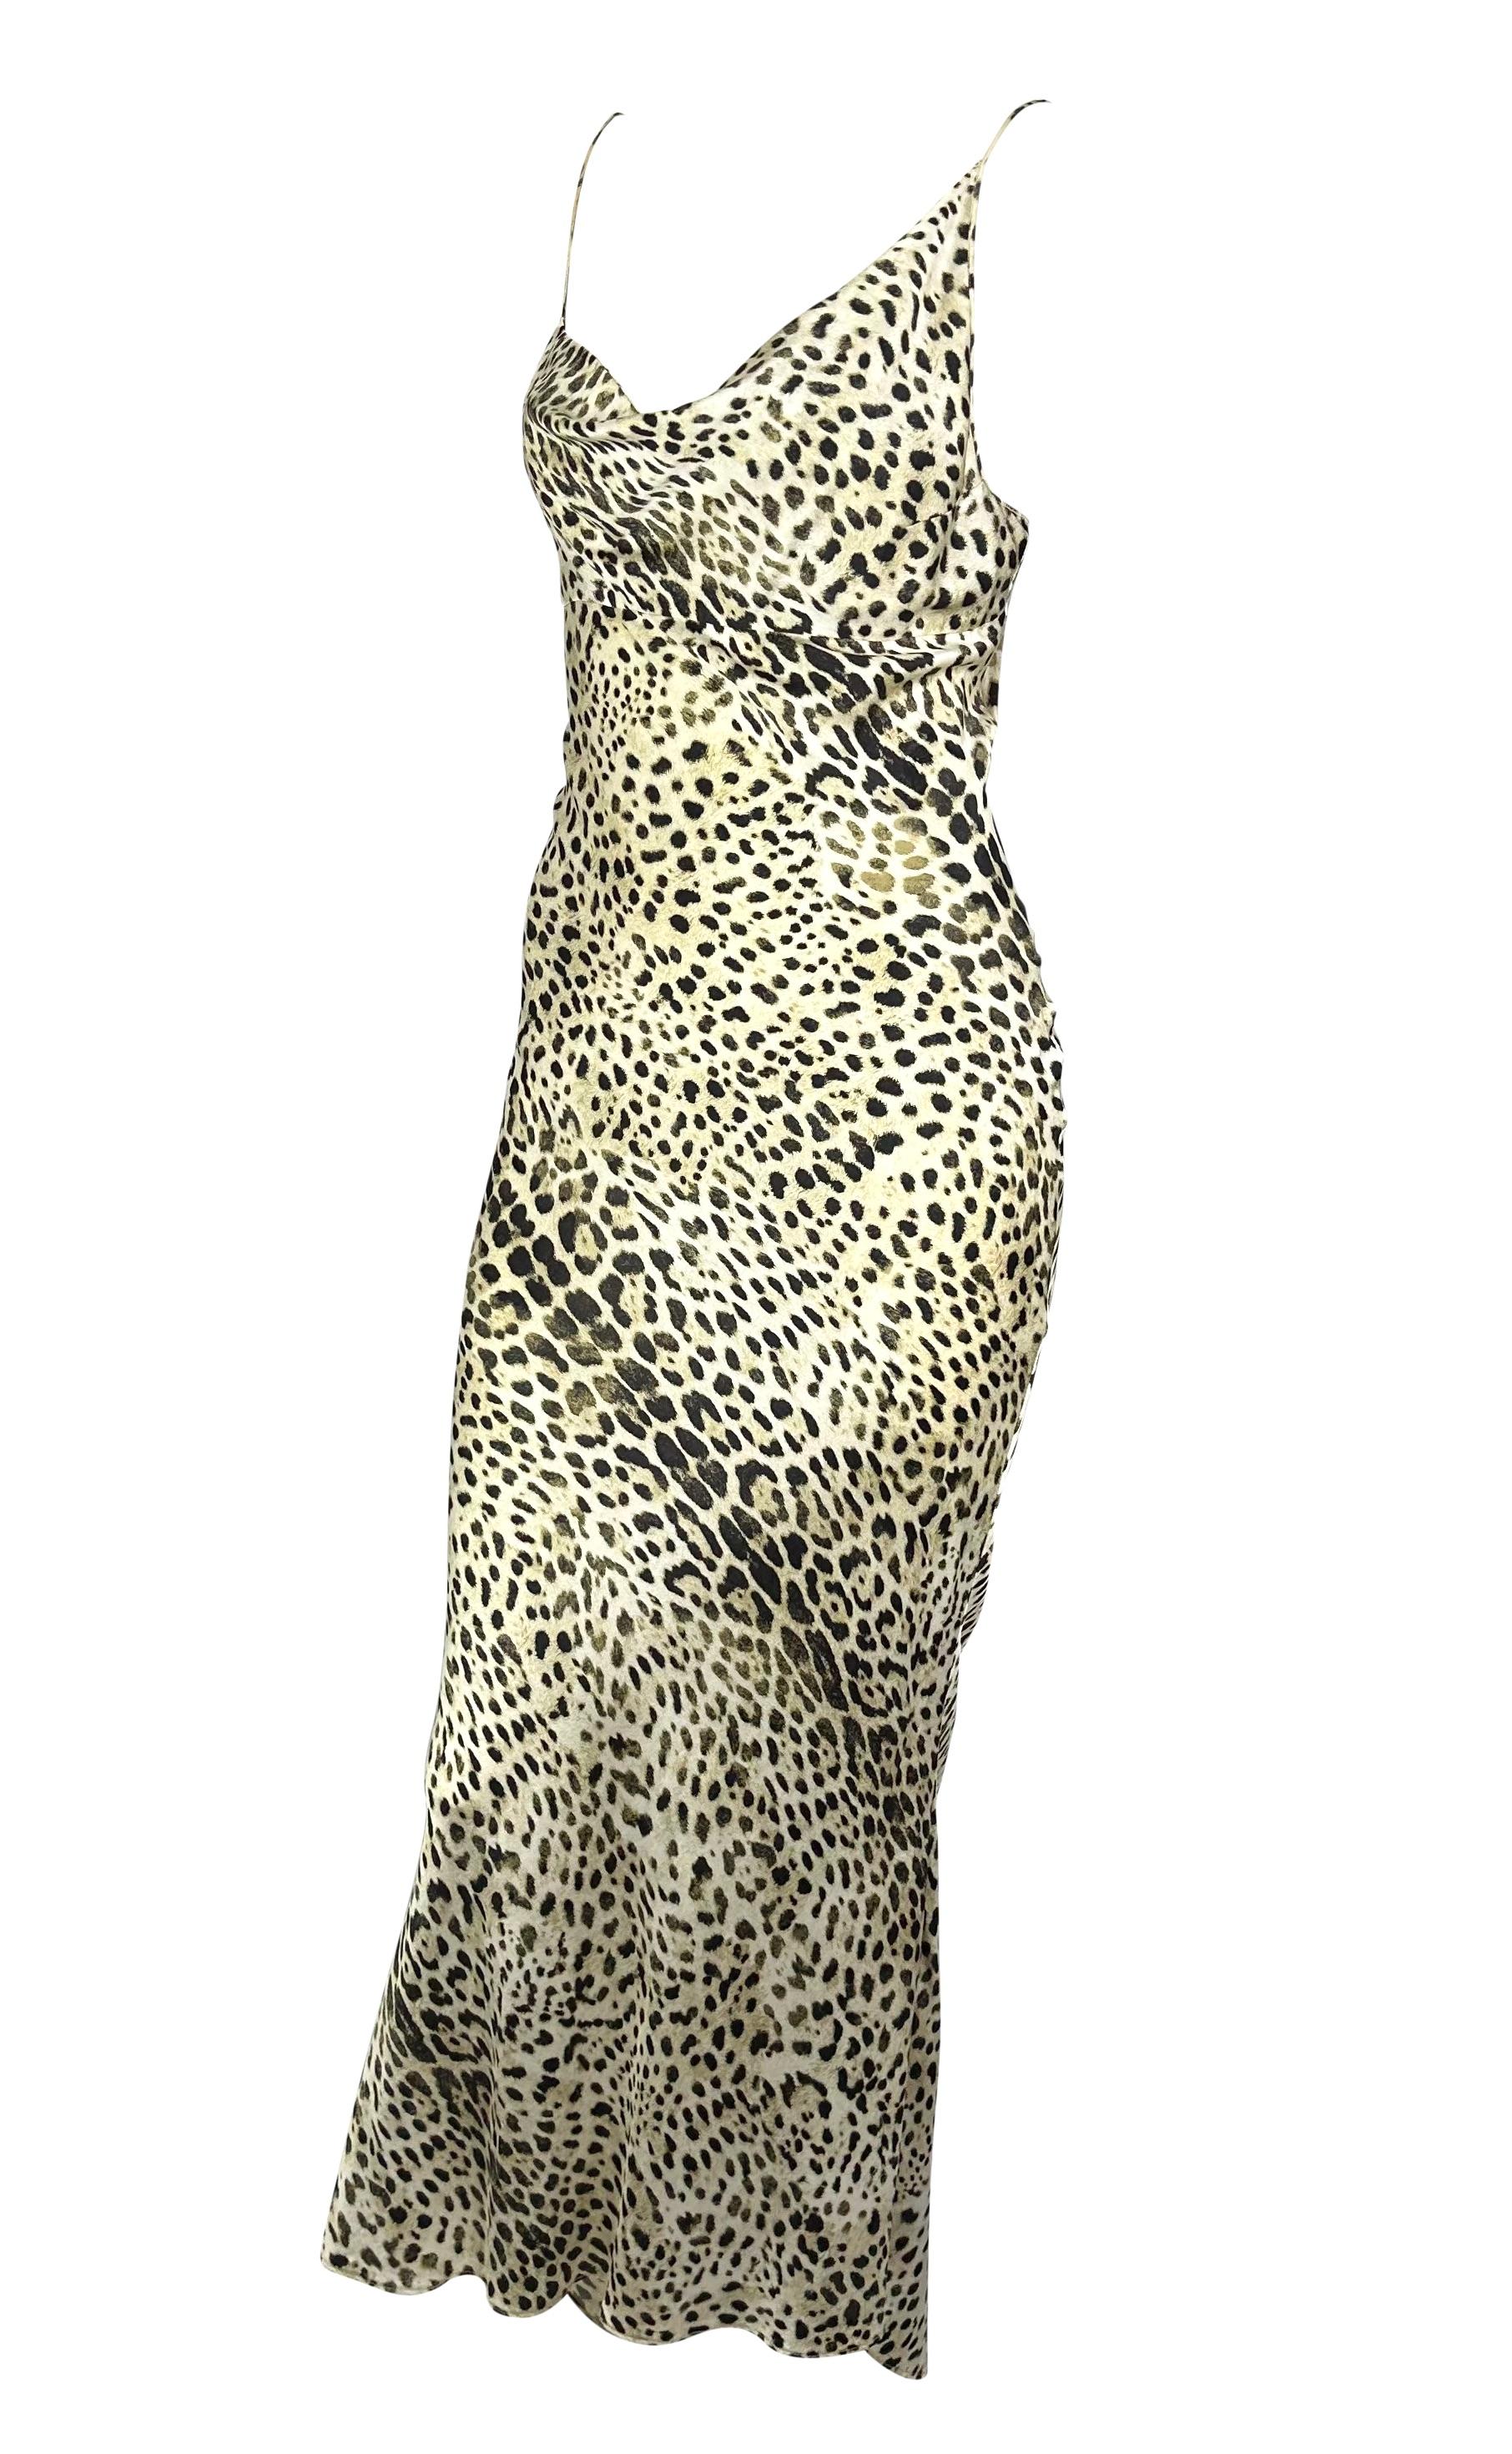 Presenting an incredible silk leopard print Roberto Cavalli bias cut gown. From the Spring/Summer 2001 collection, this fabulous full-length dress features spaghetti straps, an asymmetrical cowl neckline, and a flared hem cut. Bold animal prints are